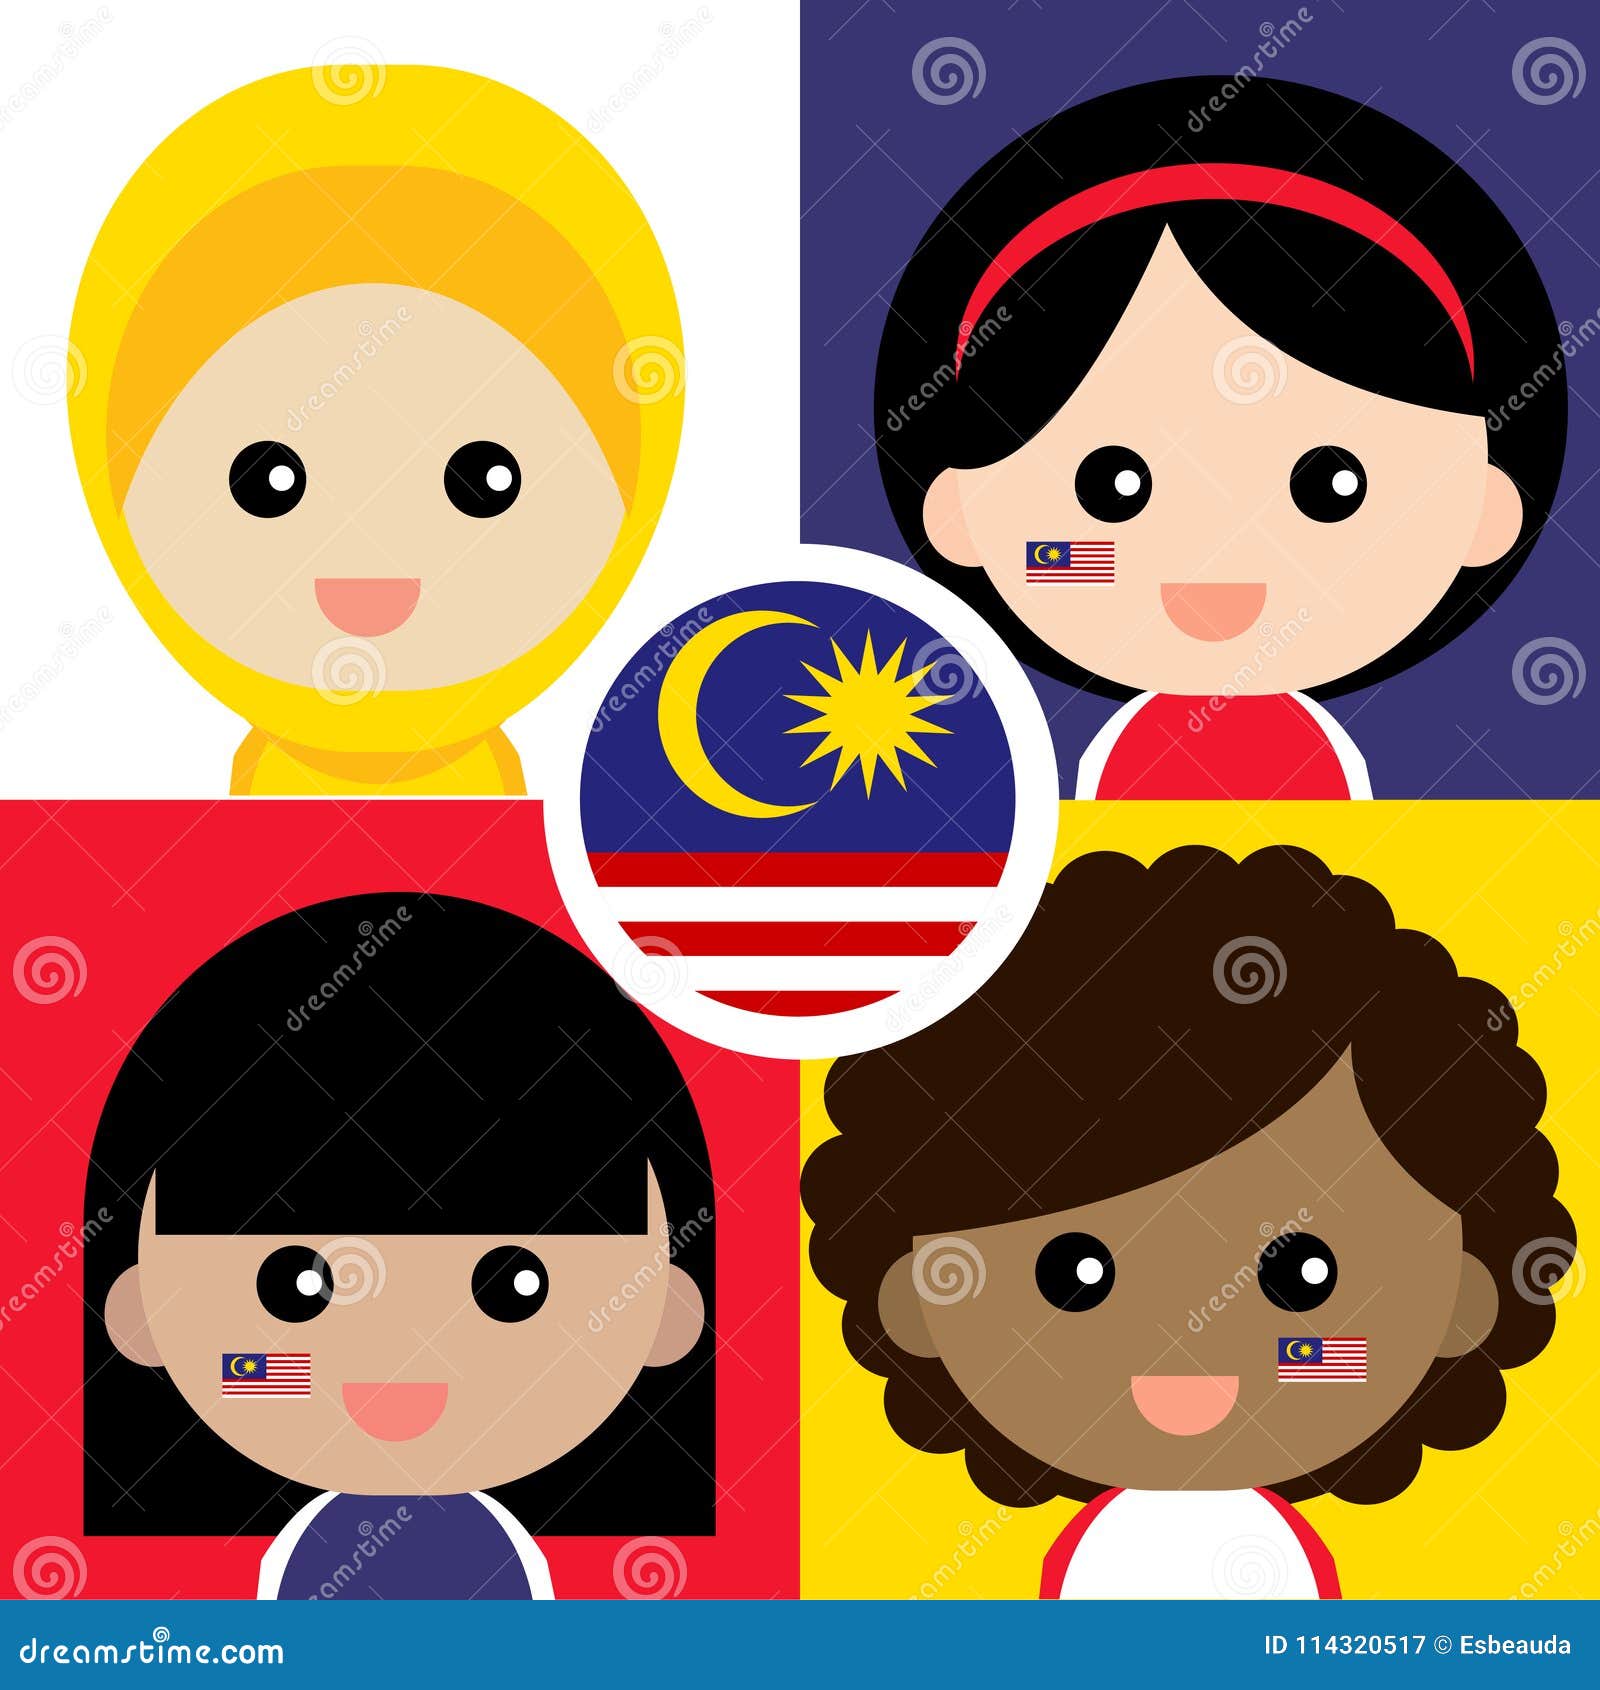 cute and cheerful malaysian supporter